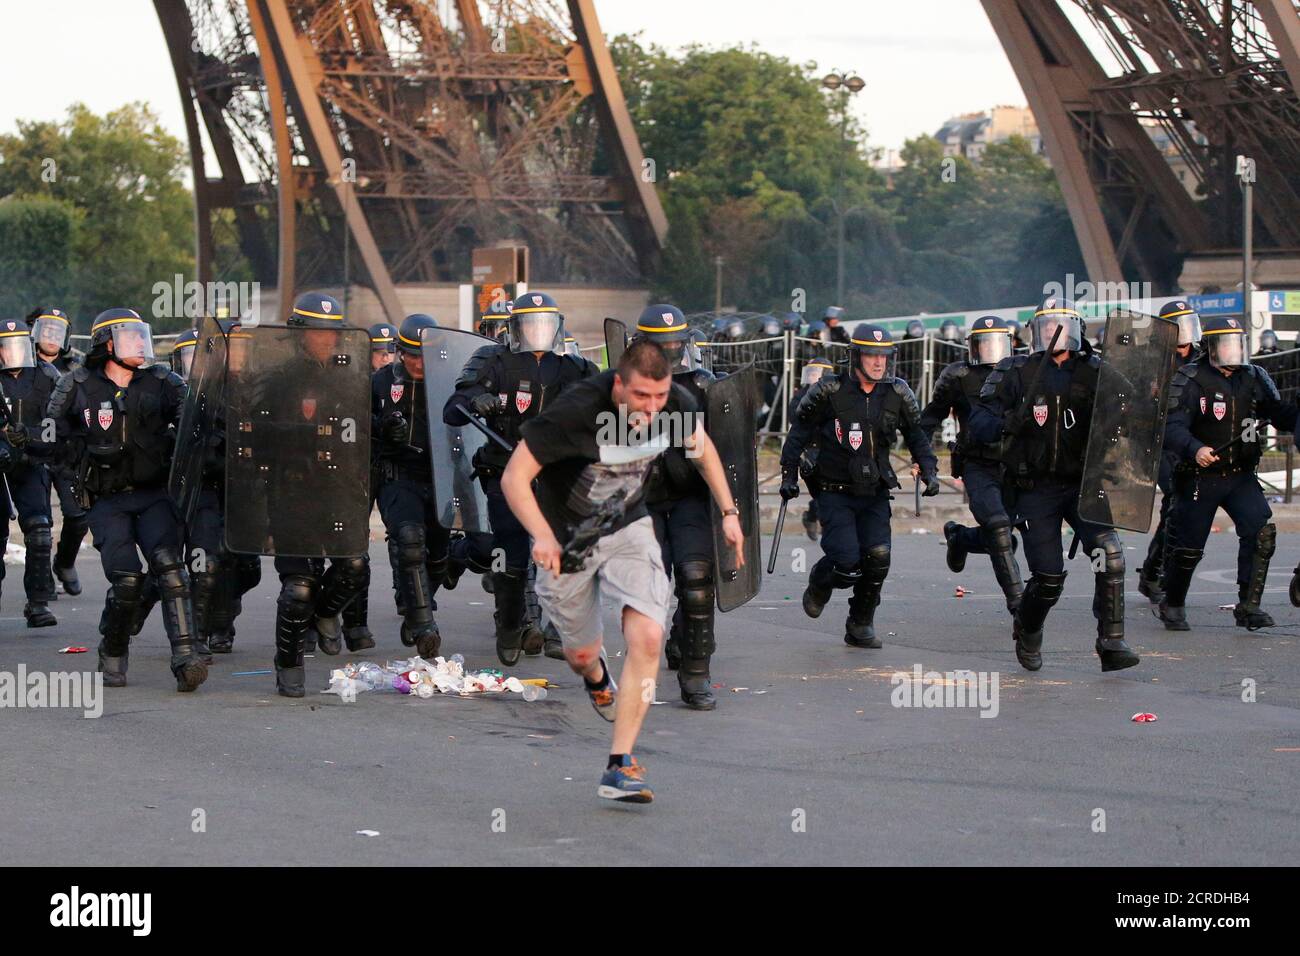 French CRS riot police charge during clashes near the Paris fan zone during the Portugal v France EURO 2016 final soccer match in Paris, France, July 10, 2016. French police fired tear gas to disperse dozens of people trying to enter the 'fan zone' at the foot of the Eiffel Tower to watch the final of the Euro 2016 soccer tournament on Sunday evening, to prevent overcrowding.      REUTERS/Stephane Mahe Stock Photo